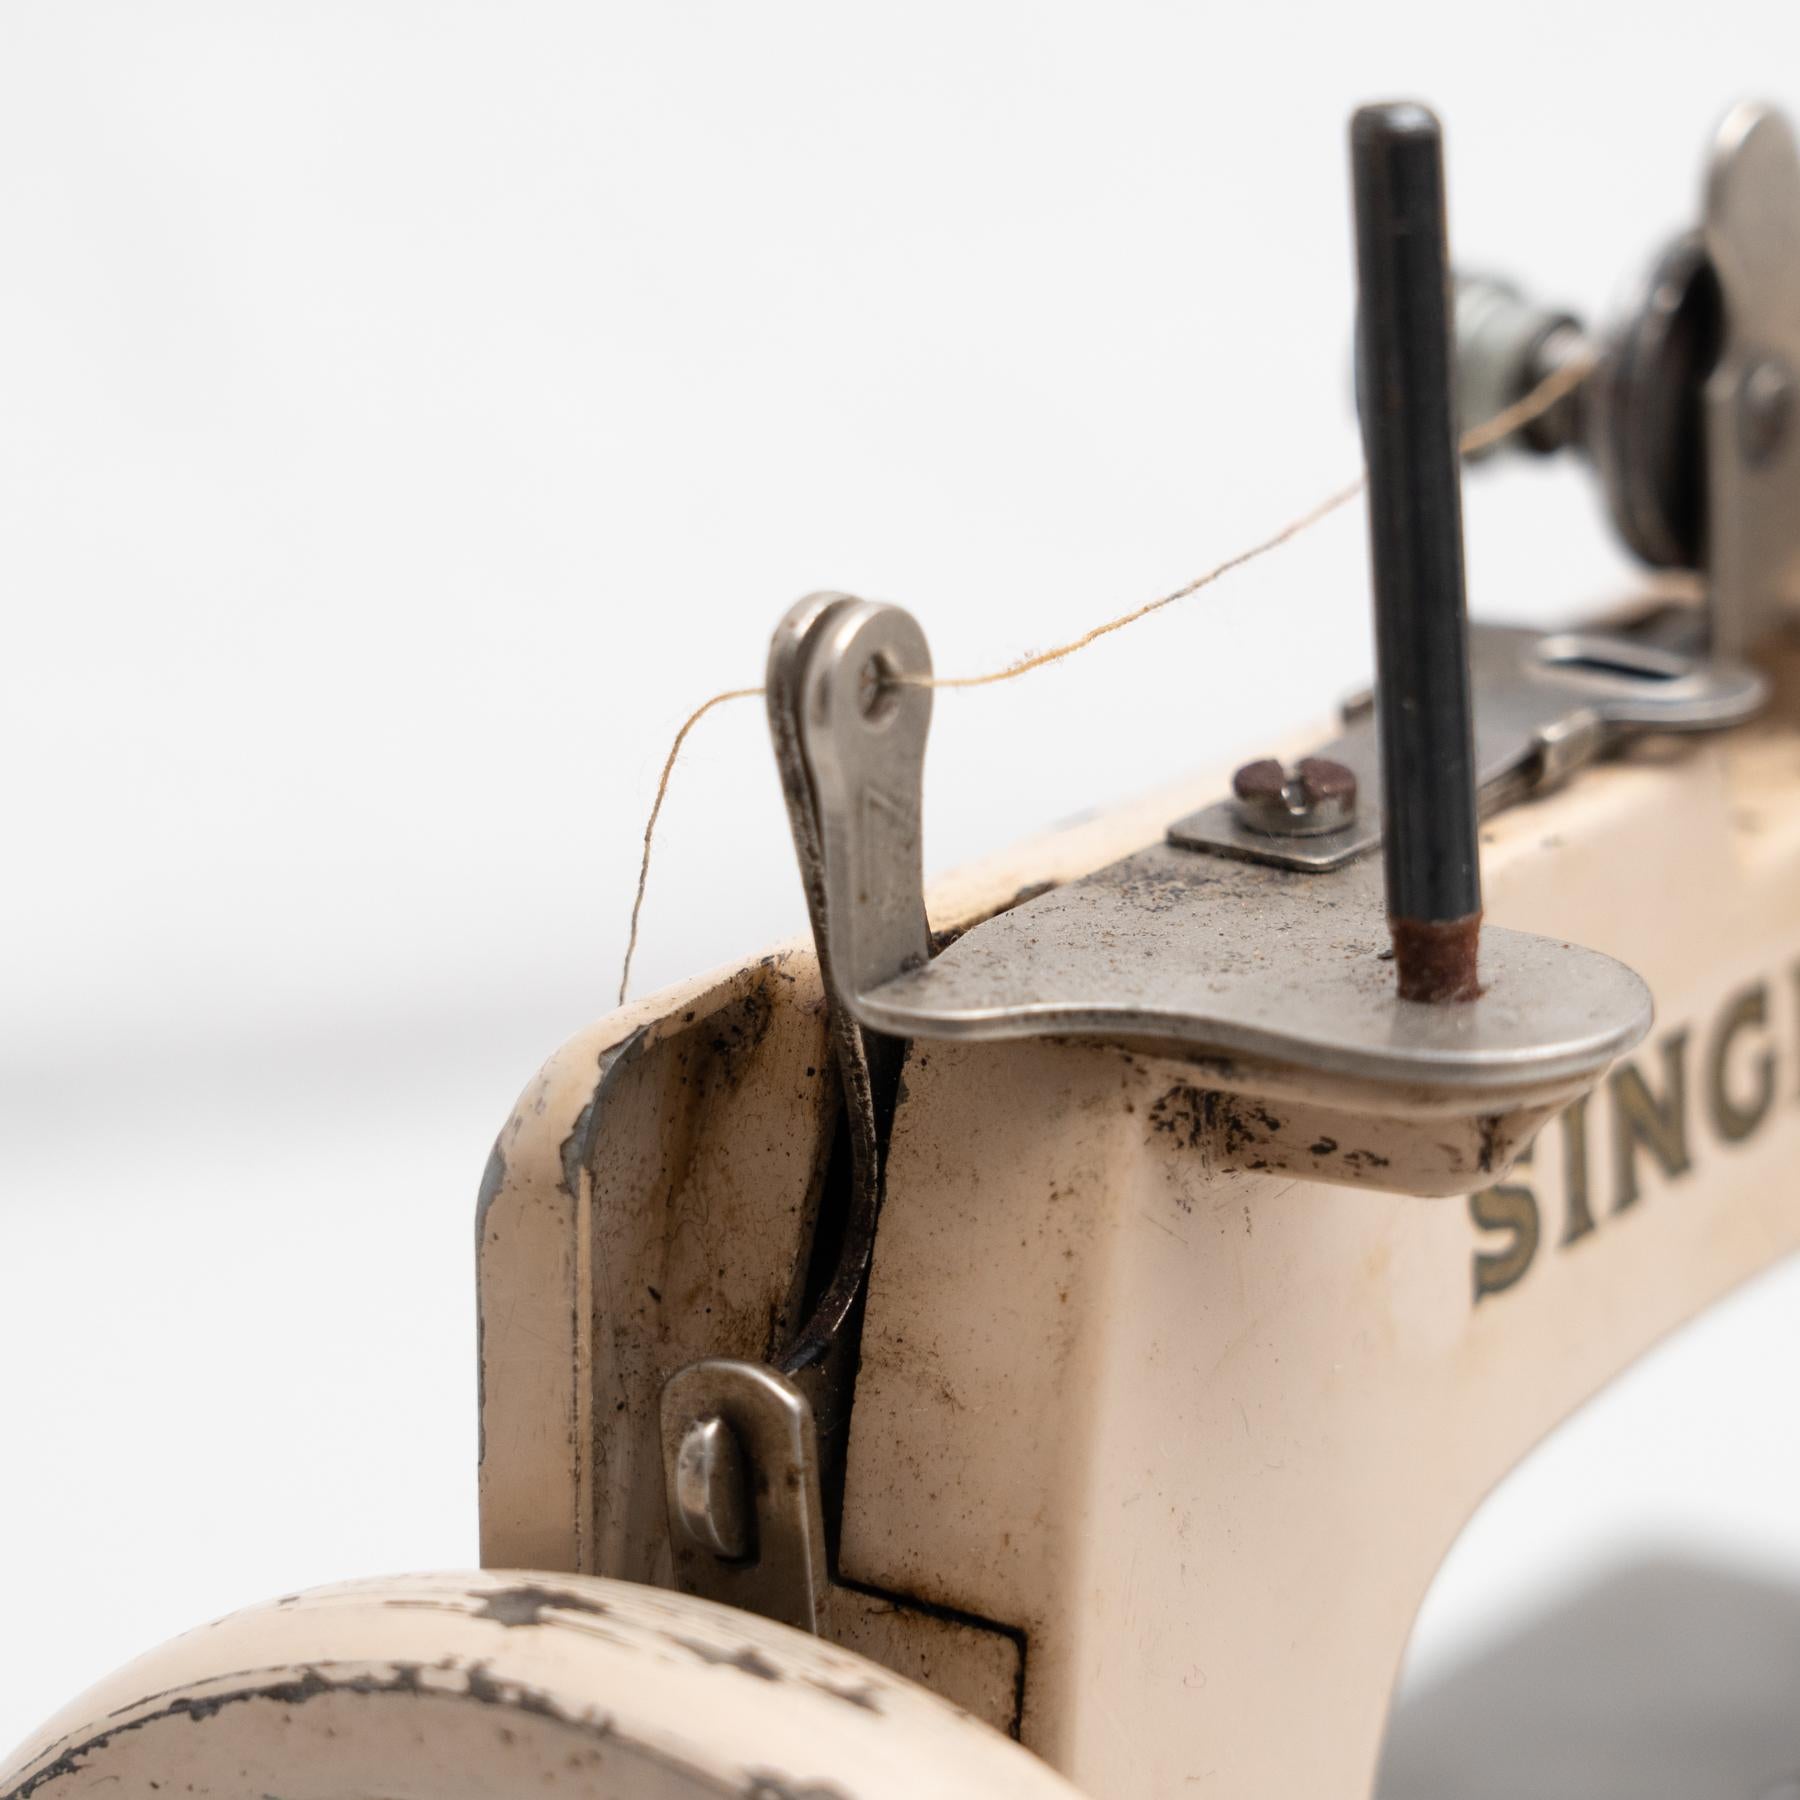 Antique Century Traditional Toy Singer Sewing Machine Reproduction, circa 1950 For Sale 7